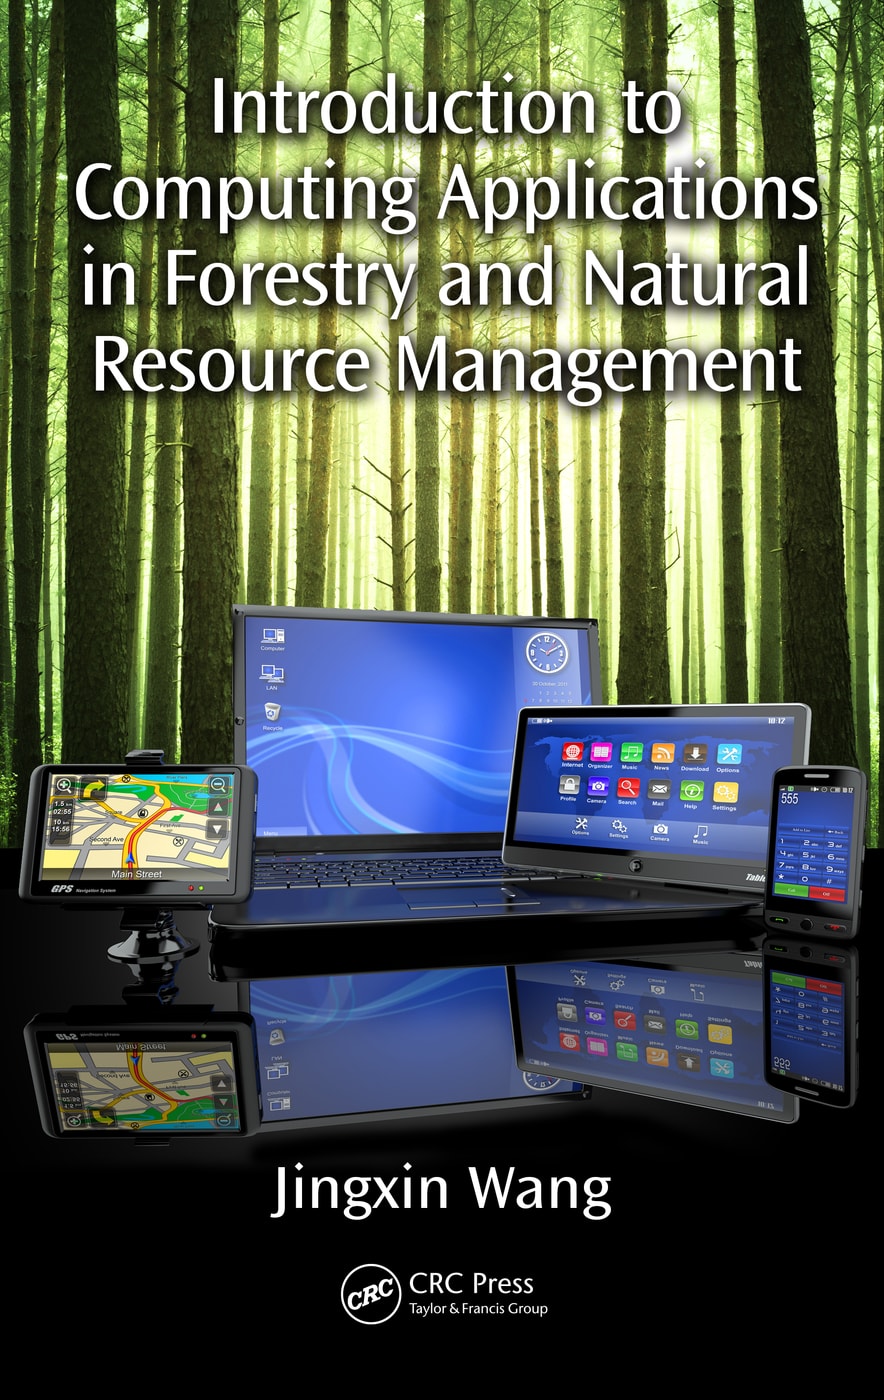 Intro to Computing Applications in Forestry